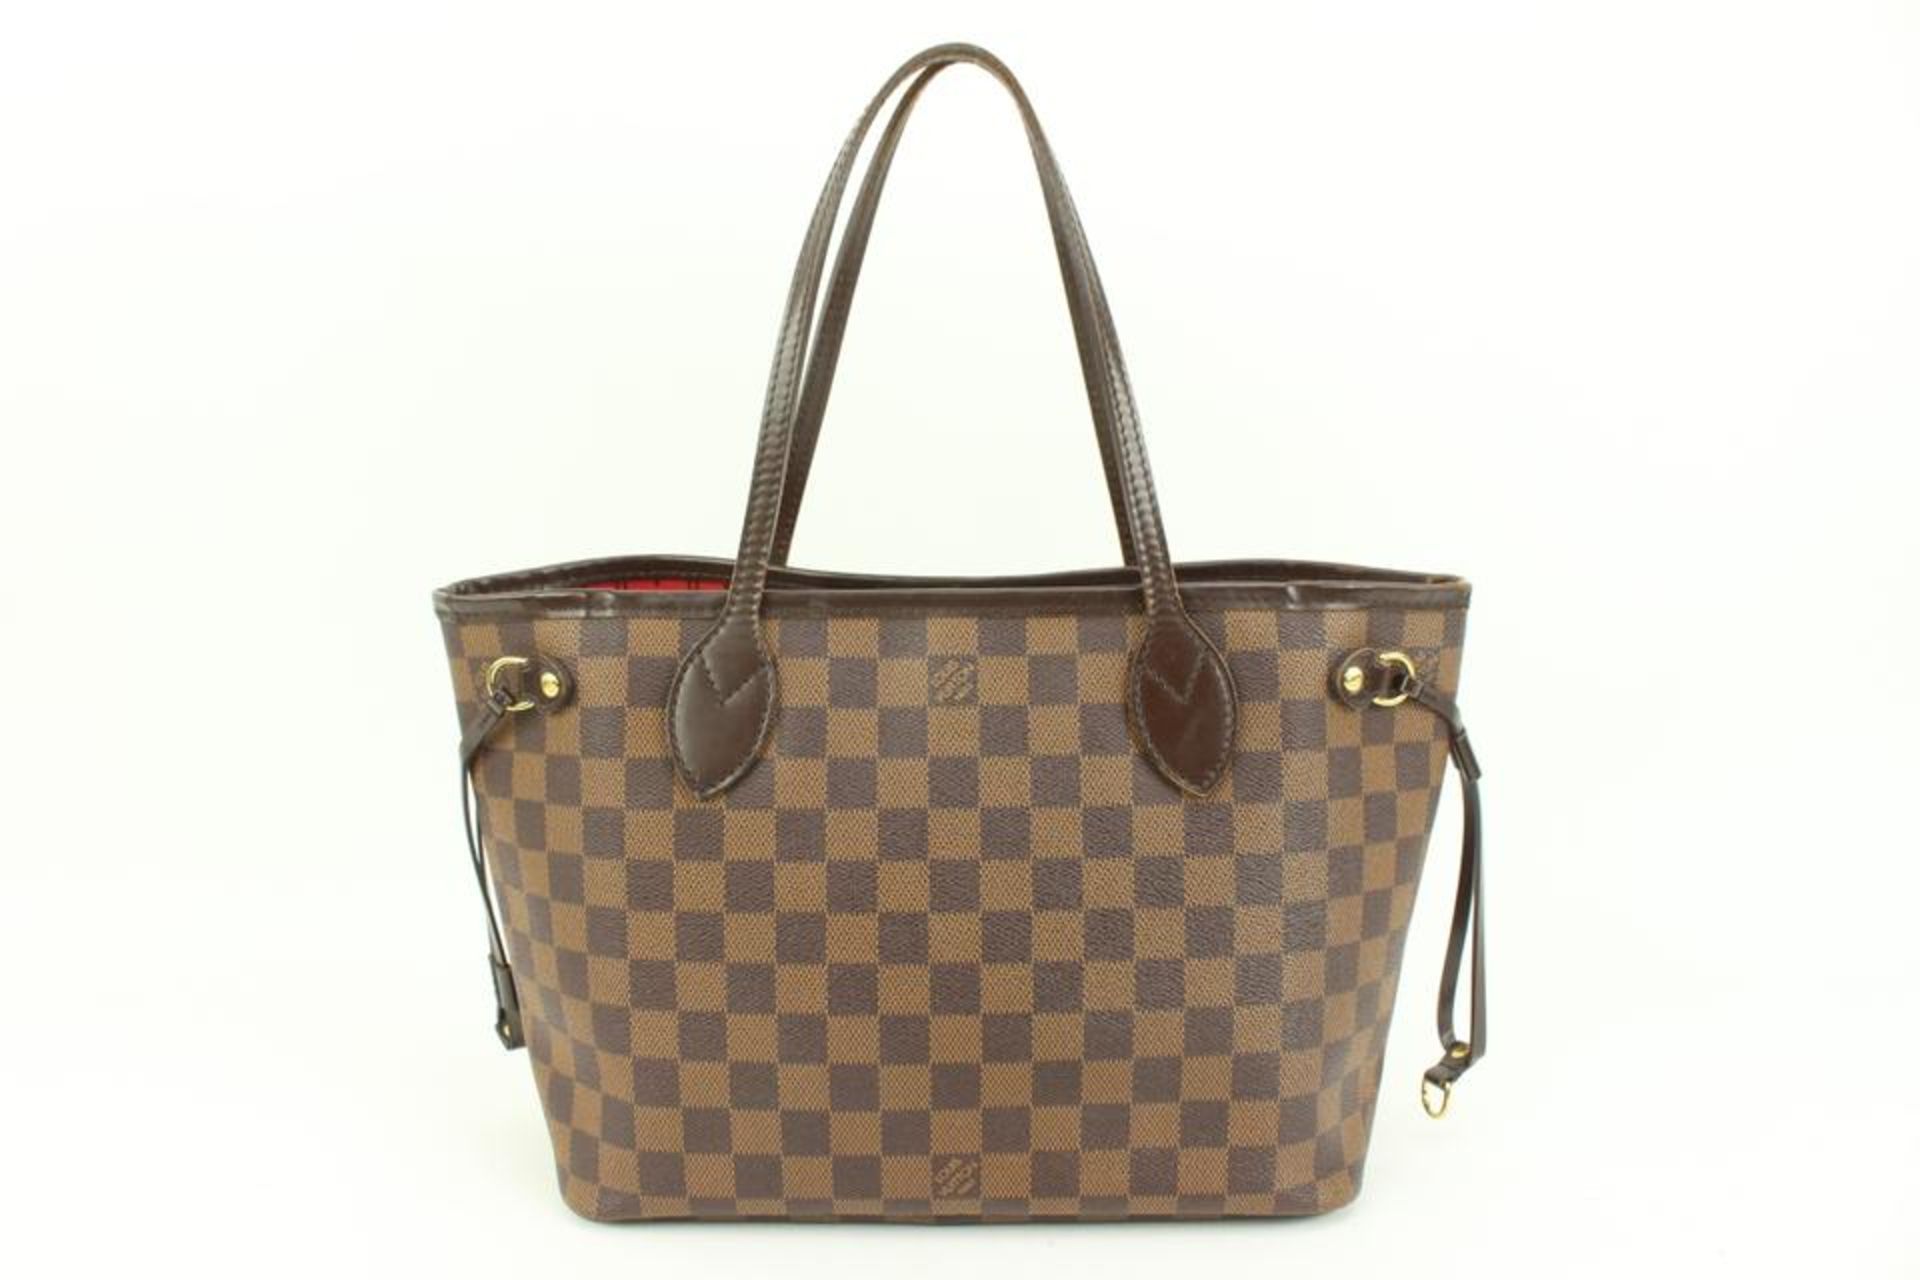 LOUIS VUITTON SMALL DAMIER EBENE NEVERFULL PM TOTE - Image 8 of 12